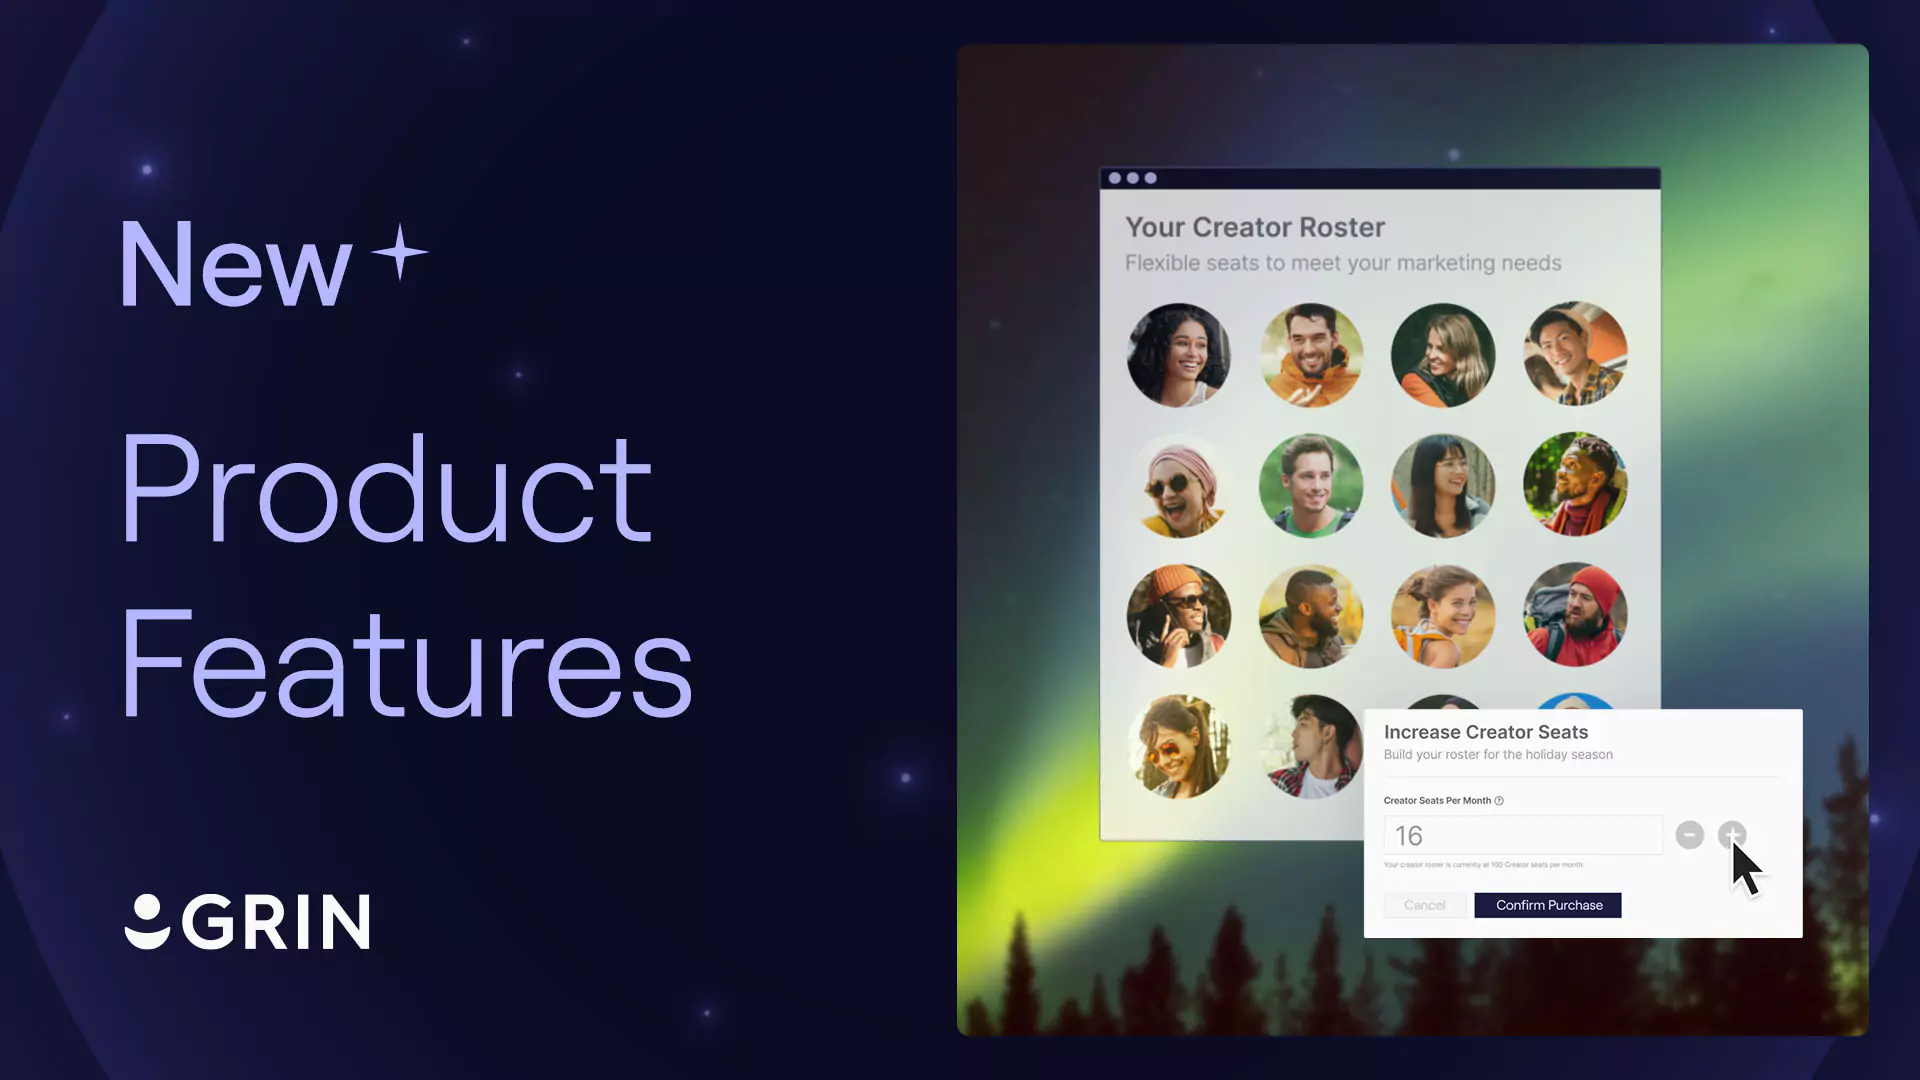 New Product Features featured image from GRIN